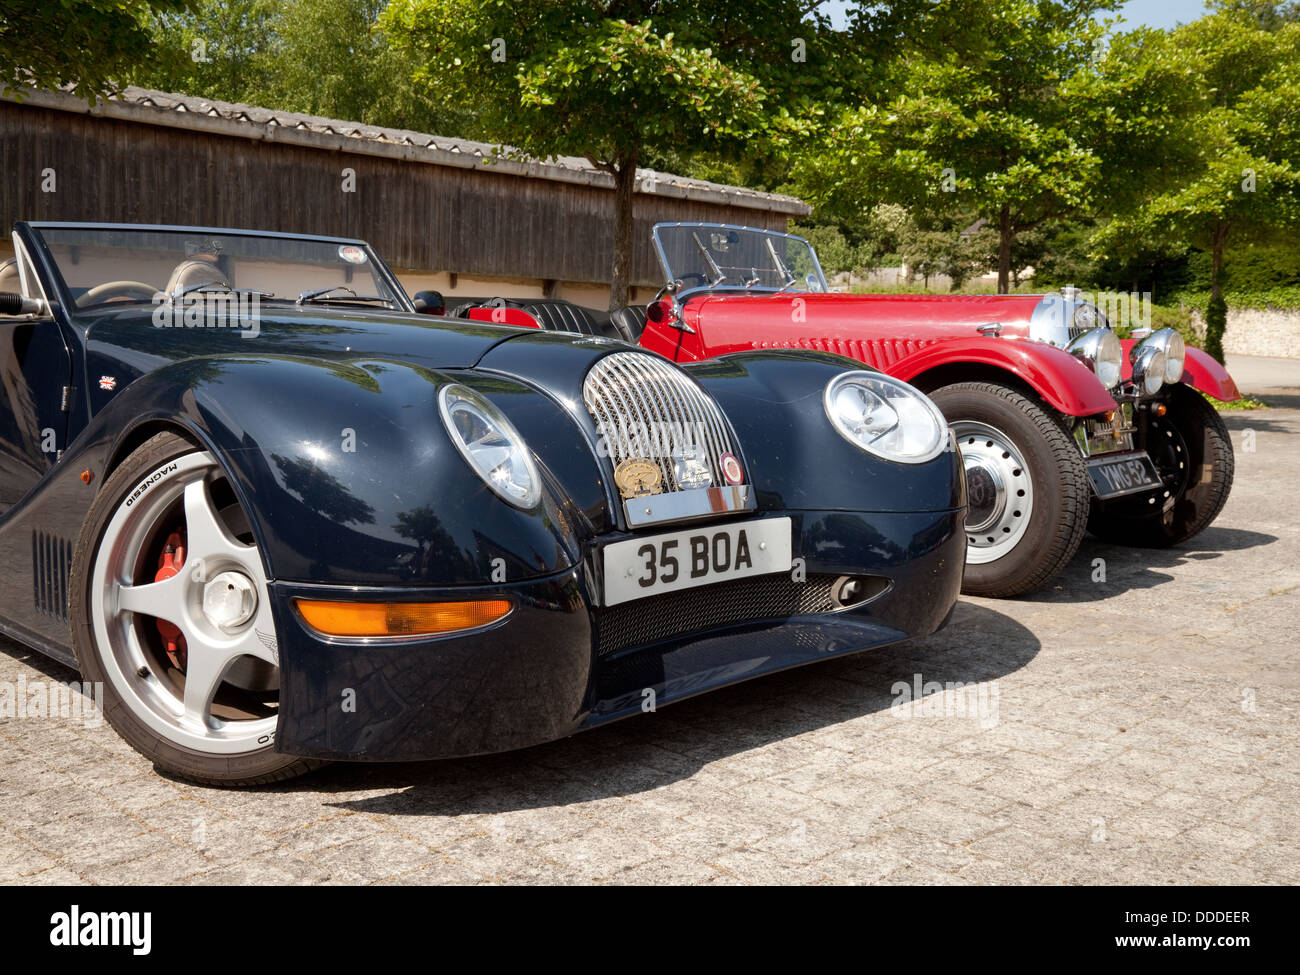 A pair of Morgan sports cars, a modern Aero 8 sports coupe, and an older Morgan, at an owners club rally, Lambourn, Berkshire UK Stock Photo